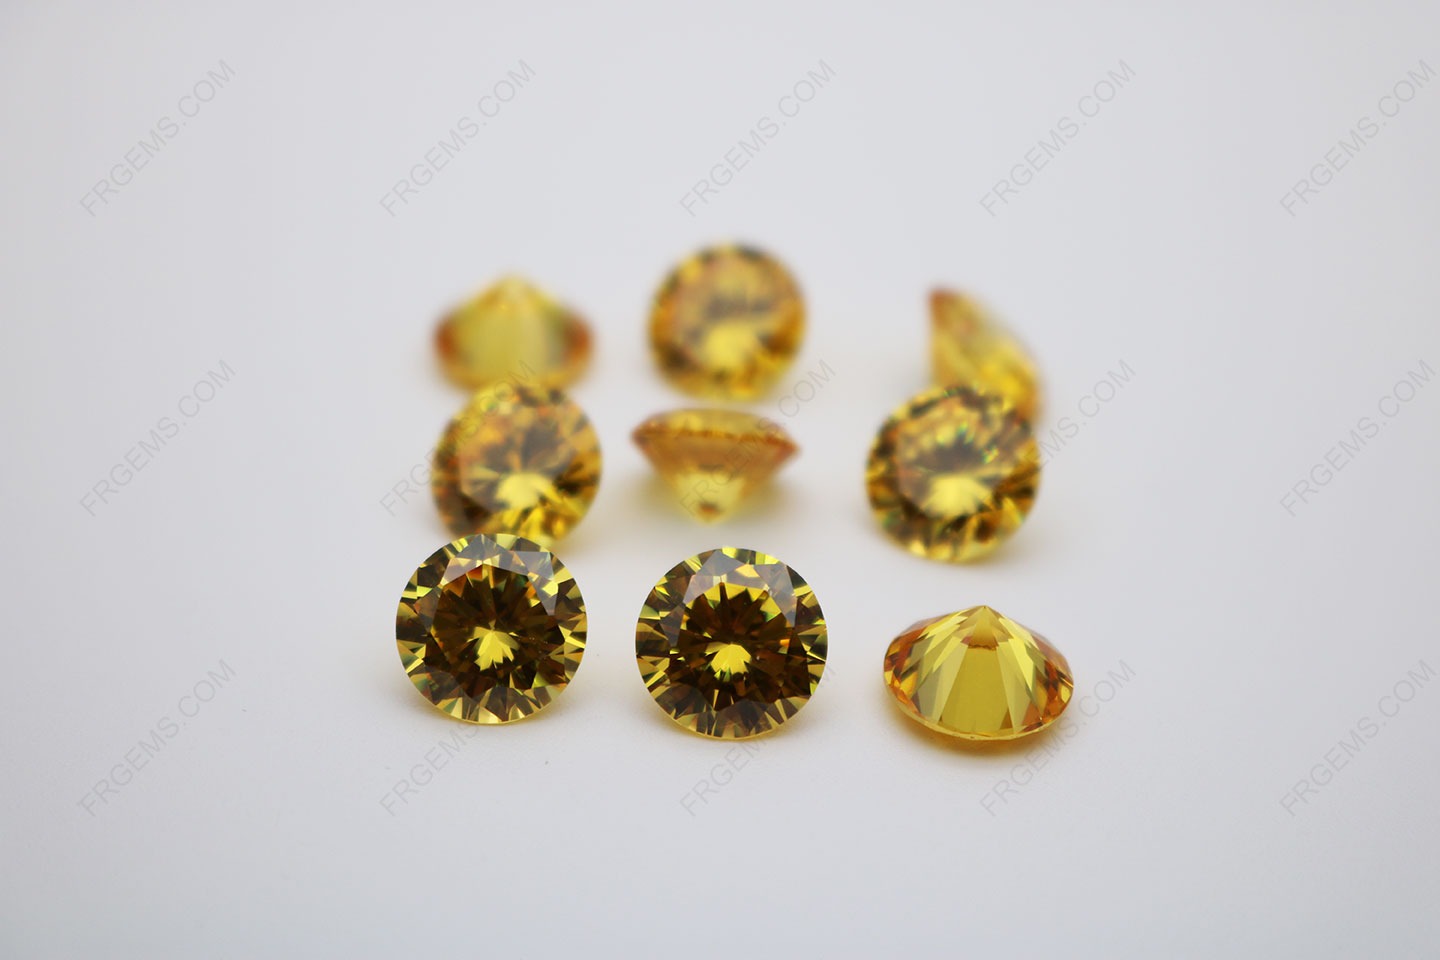 Cubic Zirconia Golden Yellow Round Shape faceted diamond Cut 10mm stones CZ05 IMG_0230